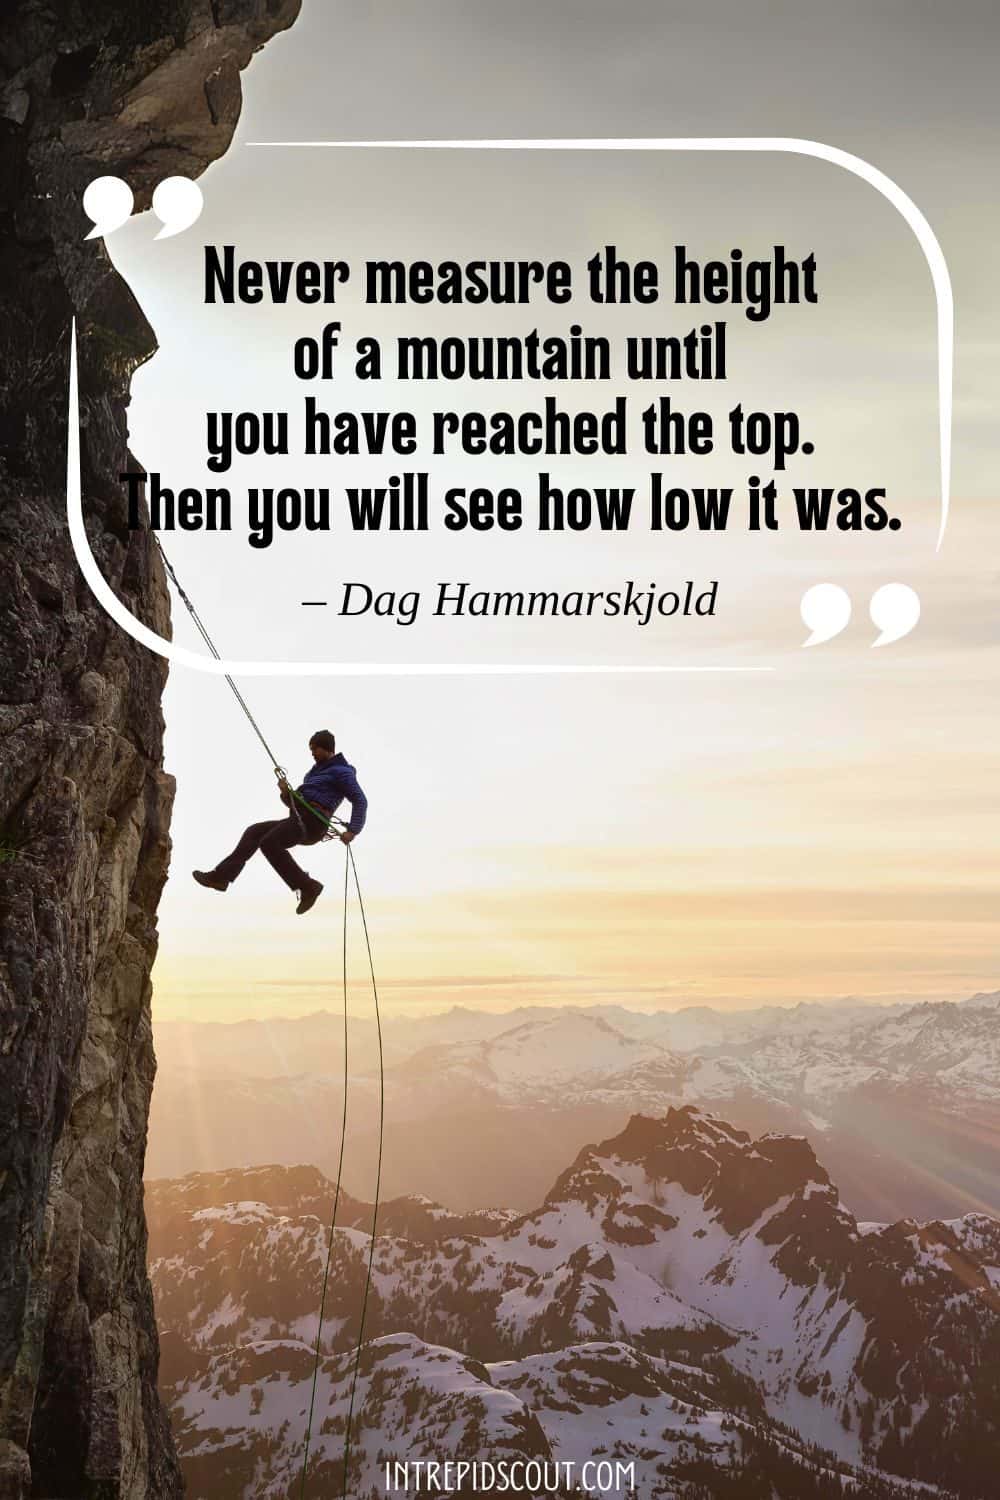 Climbing Mountains Captions and Quotes